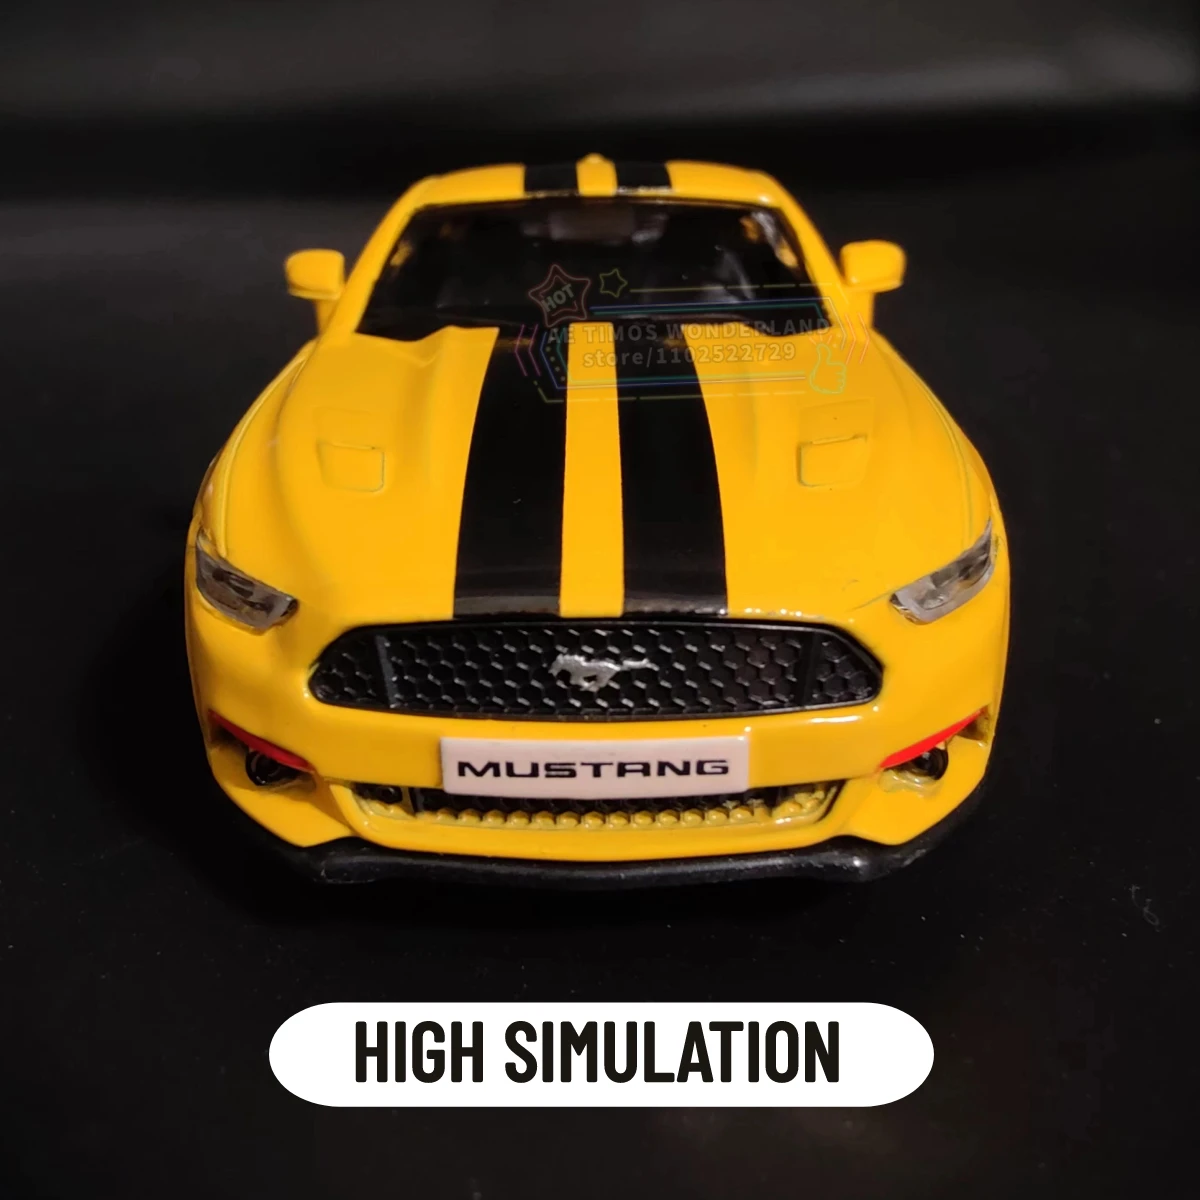 Ford Mustang Miniature